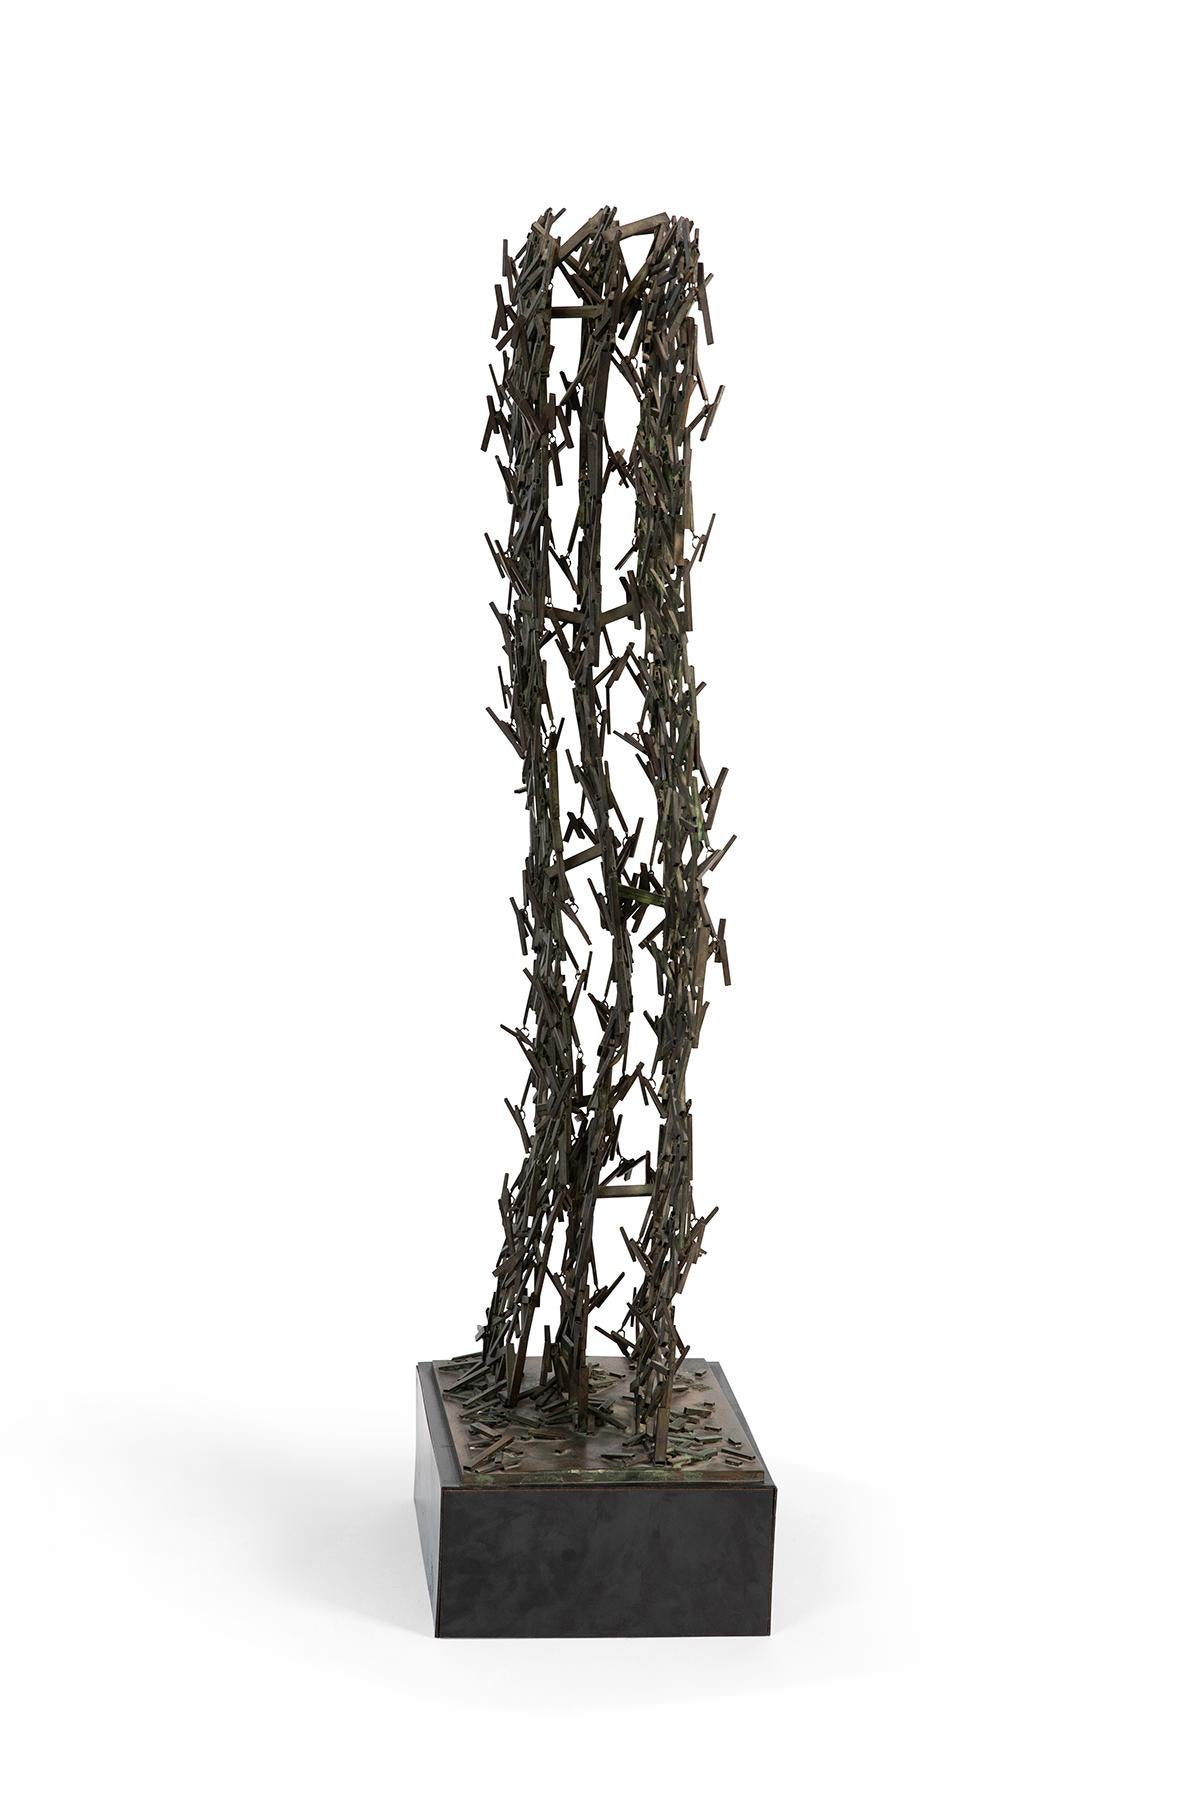 William De Lillo one off Brutalist bronze sculpture, circa early 1970s. The jeweler and artist, William De Lillo worked with Harry Winston, Cartier New York and most famously as Jean Schlumberger’s assistant at Tiffany & Co. Mr. de Lillo teamed with